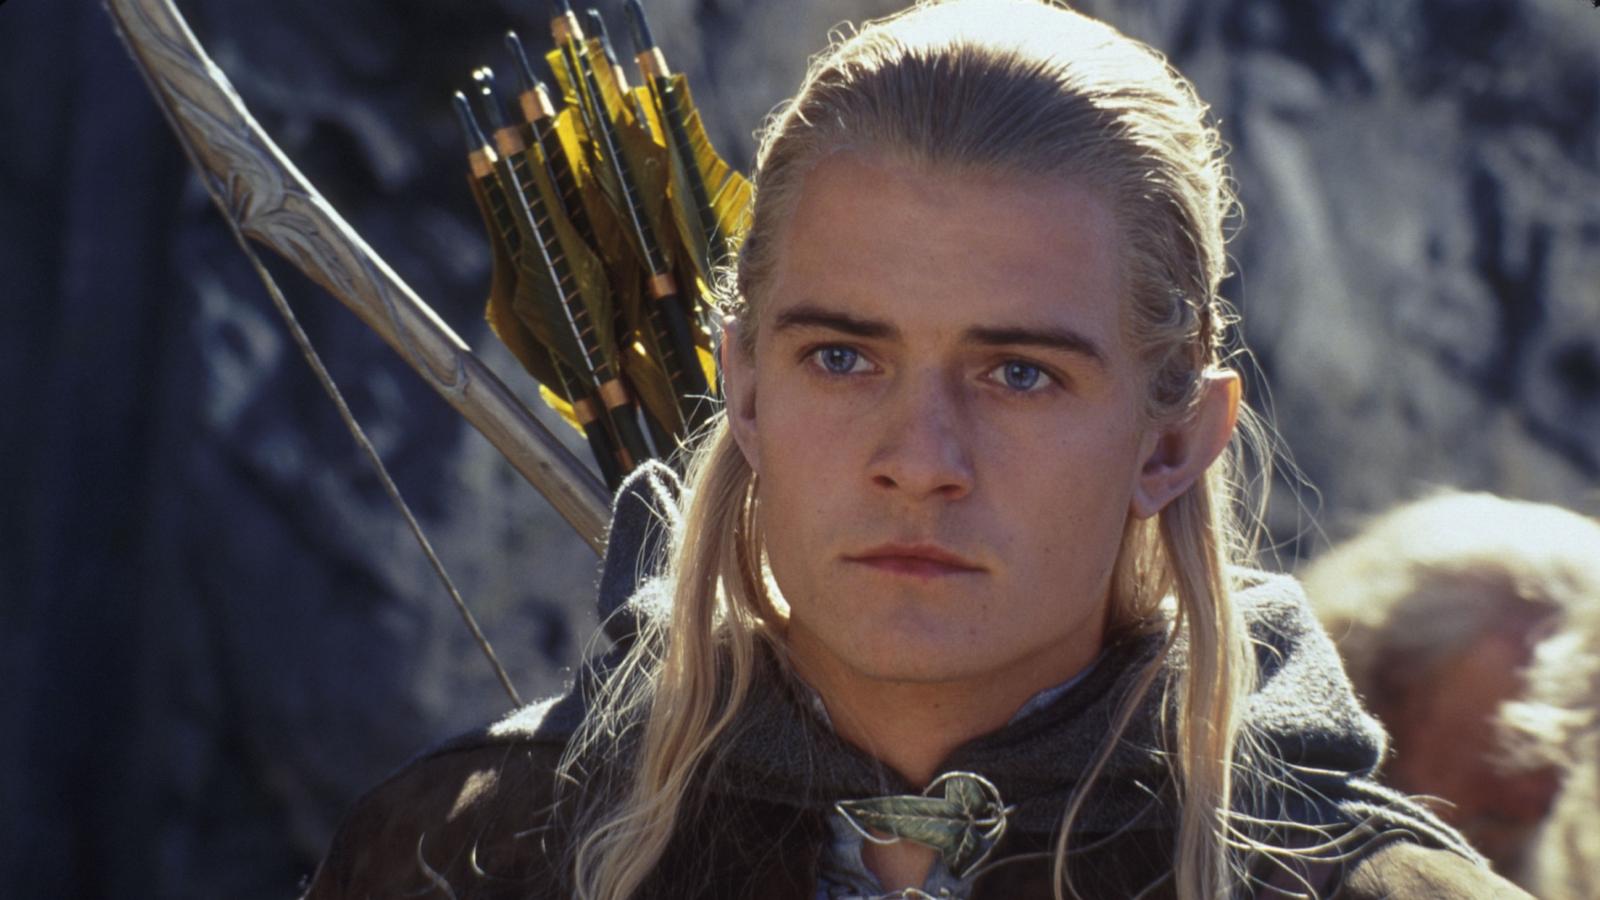 PHOTO: Orlando Bloom in The Lord Of The Rings - The Two Towers, 2002.